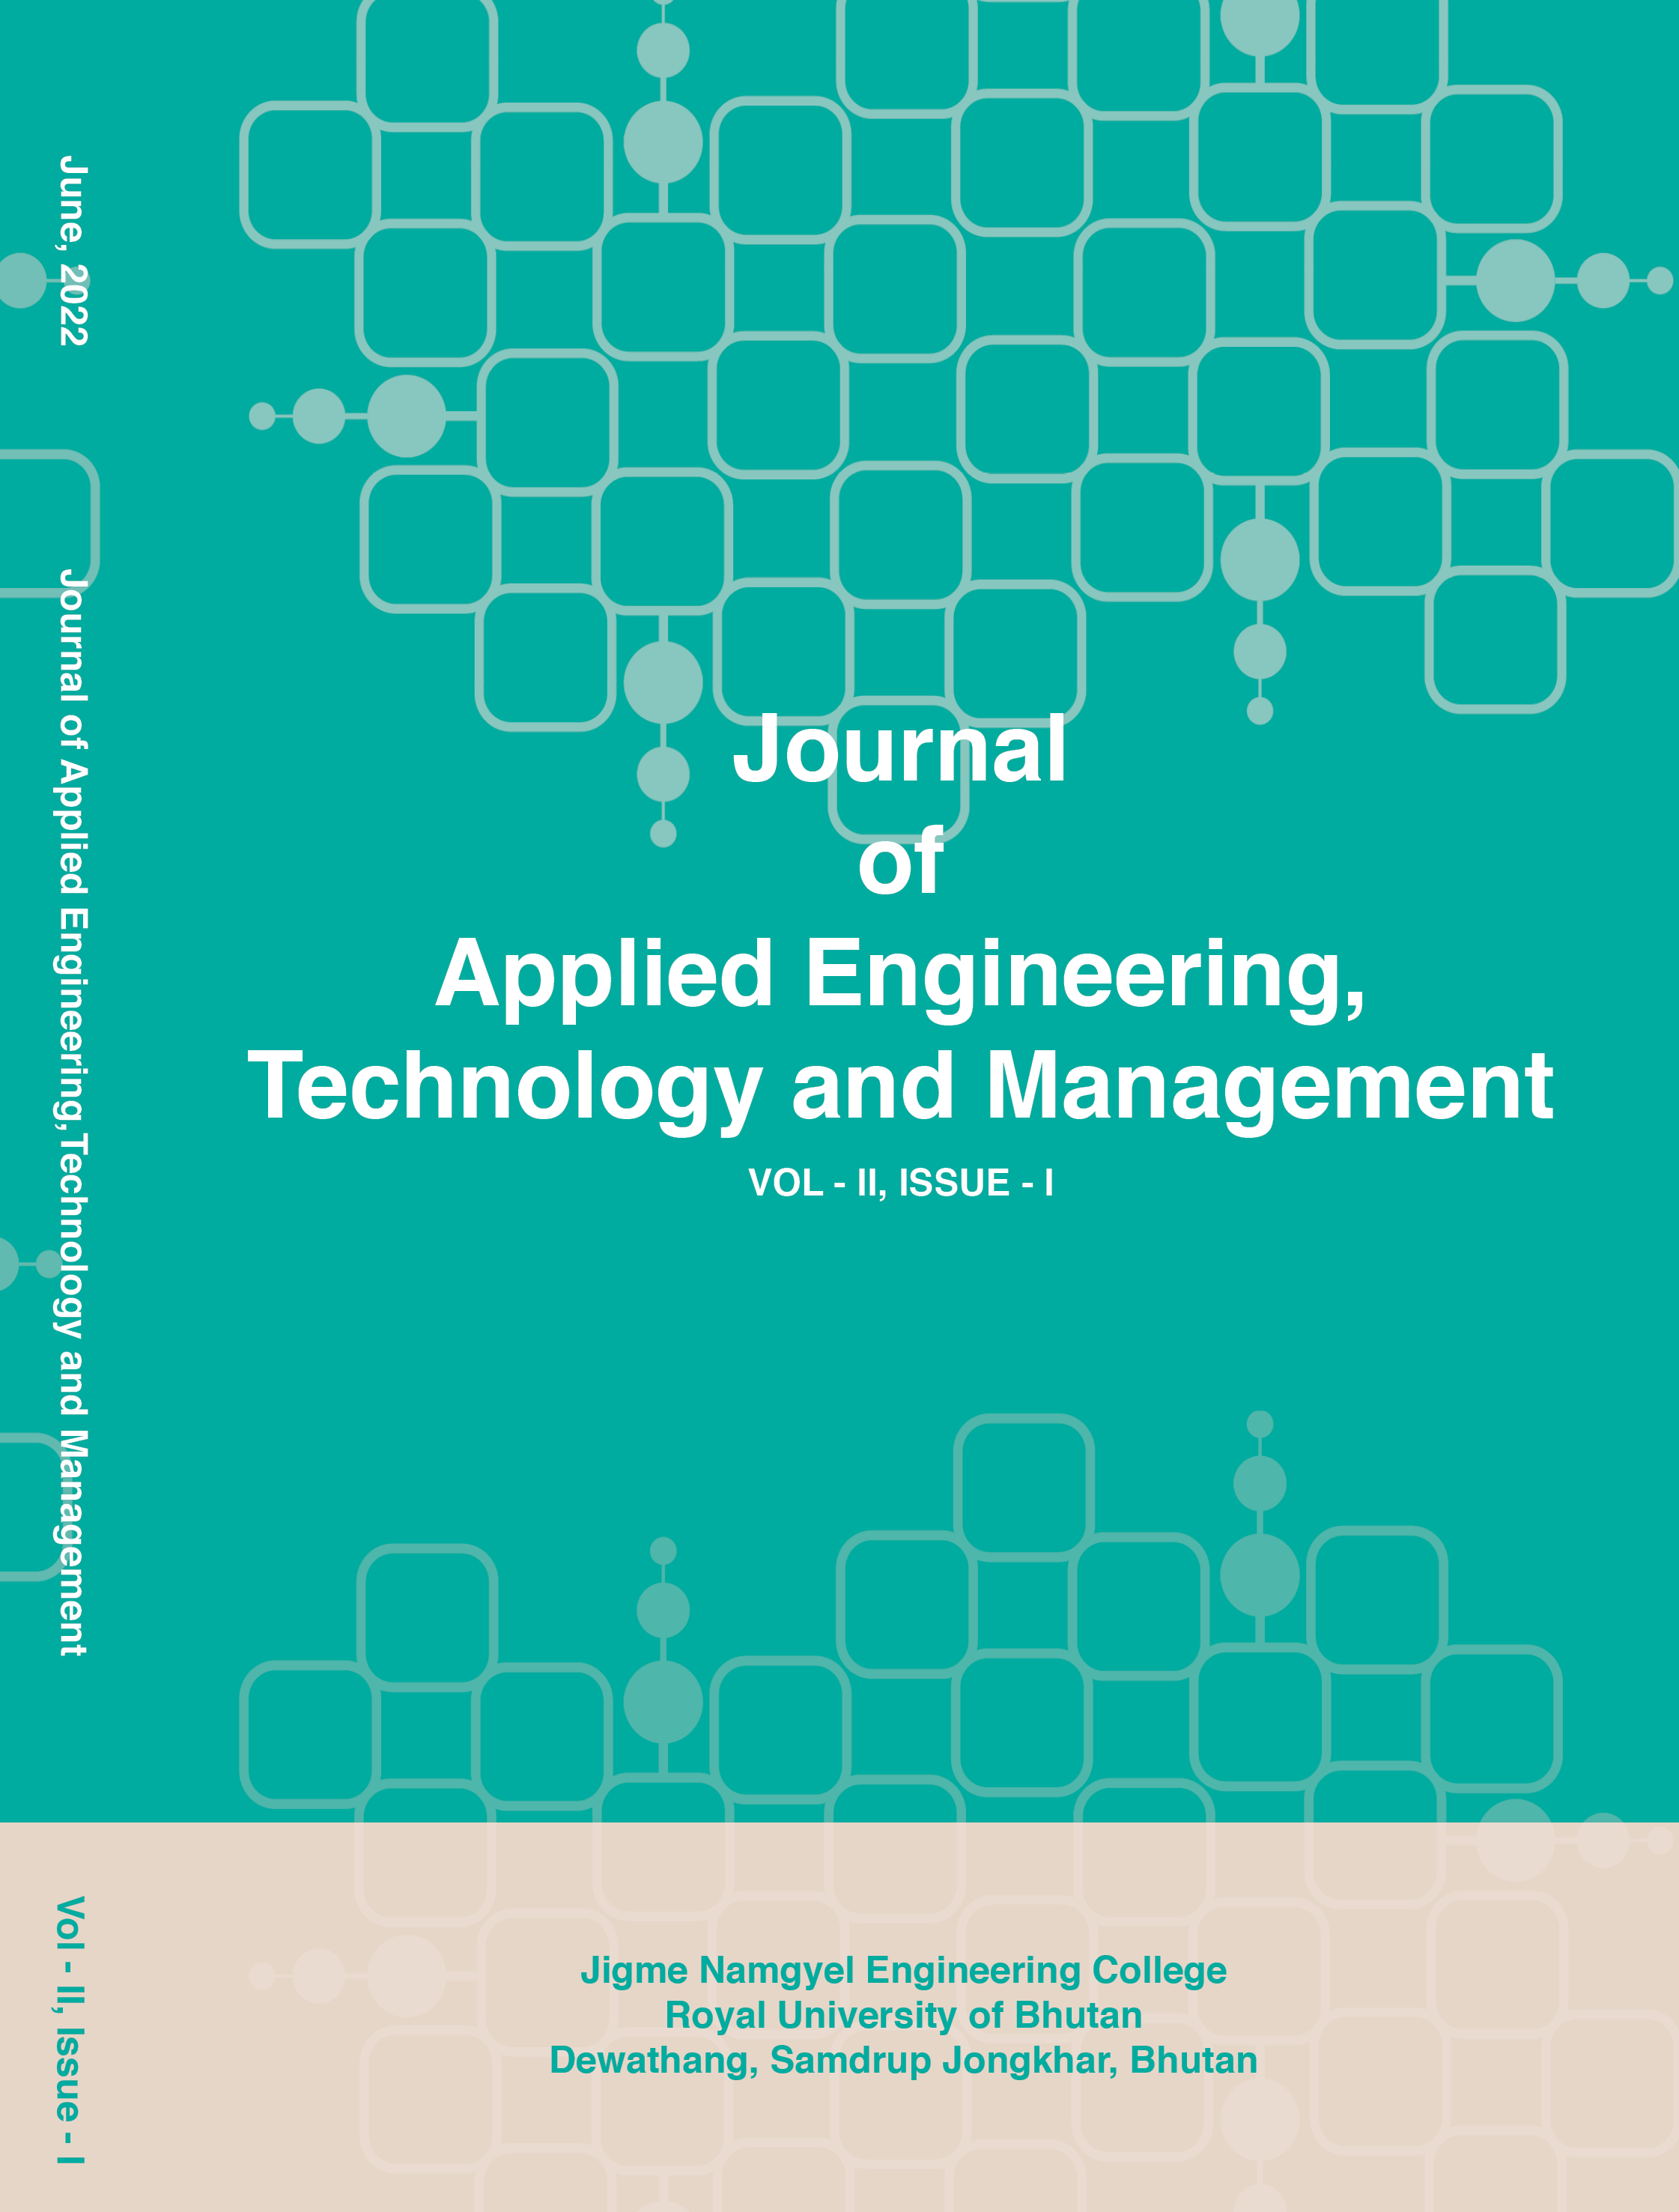 Journal of Applied Engineering Technology and Management, Vol - II, Issue -I